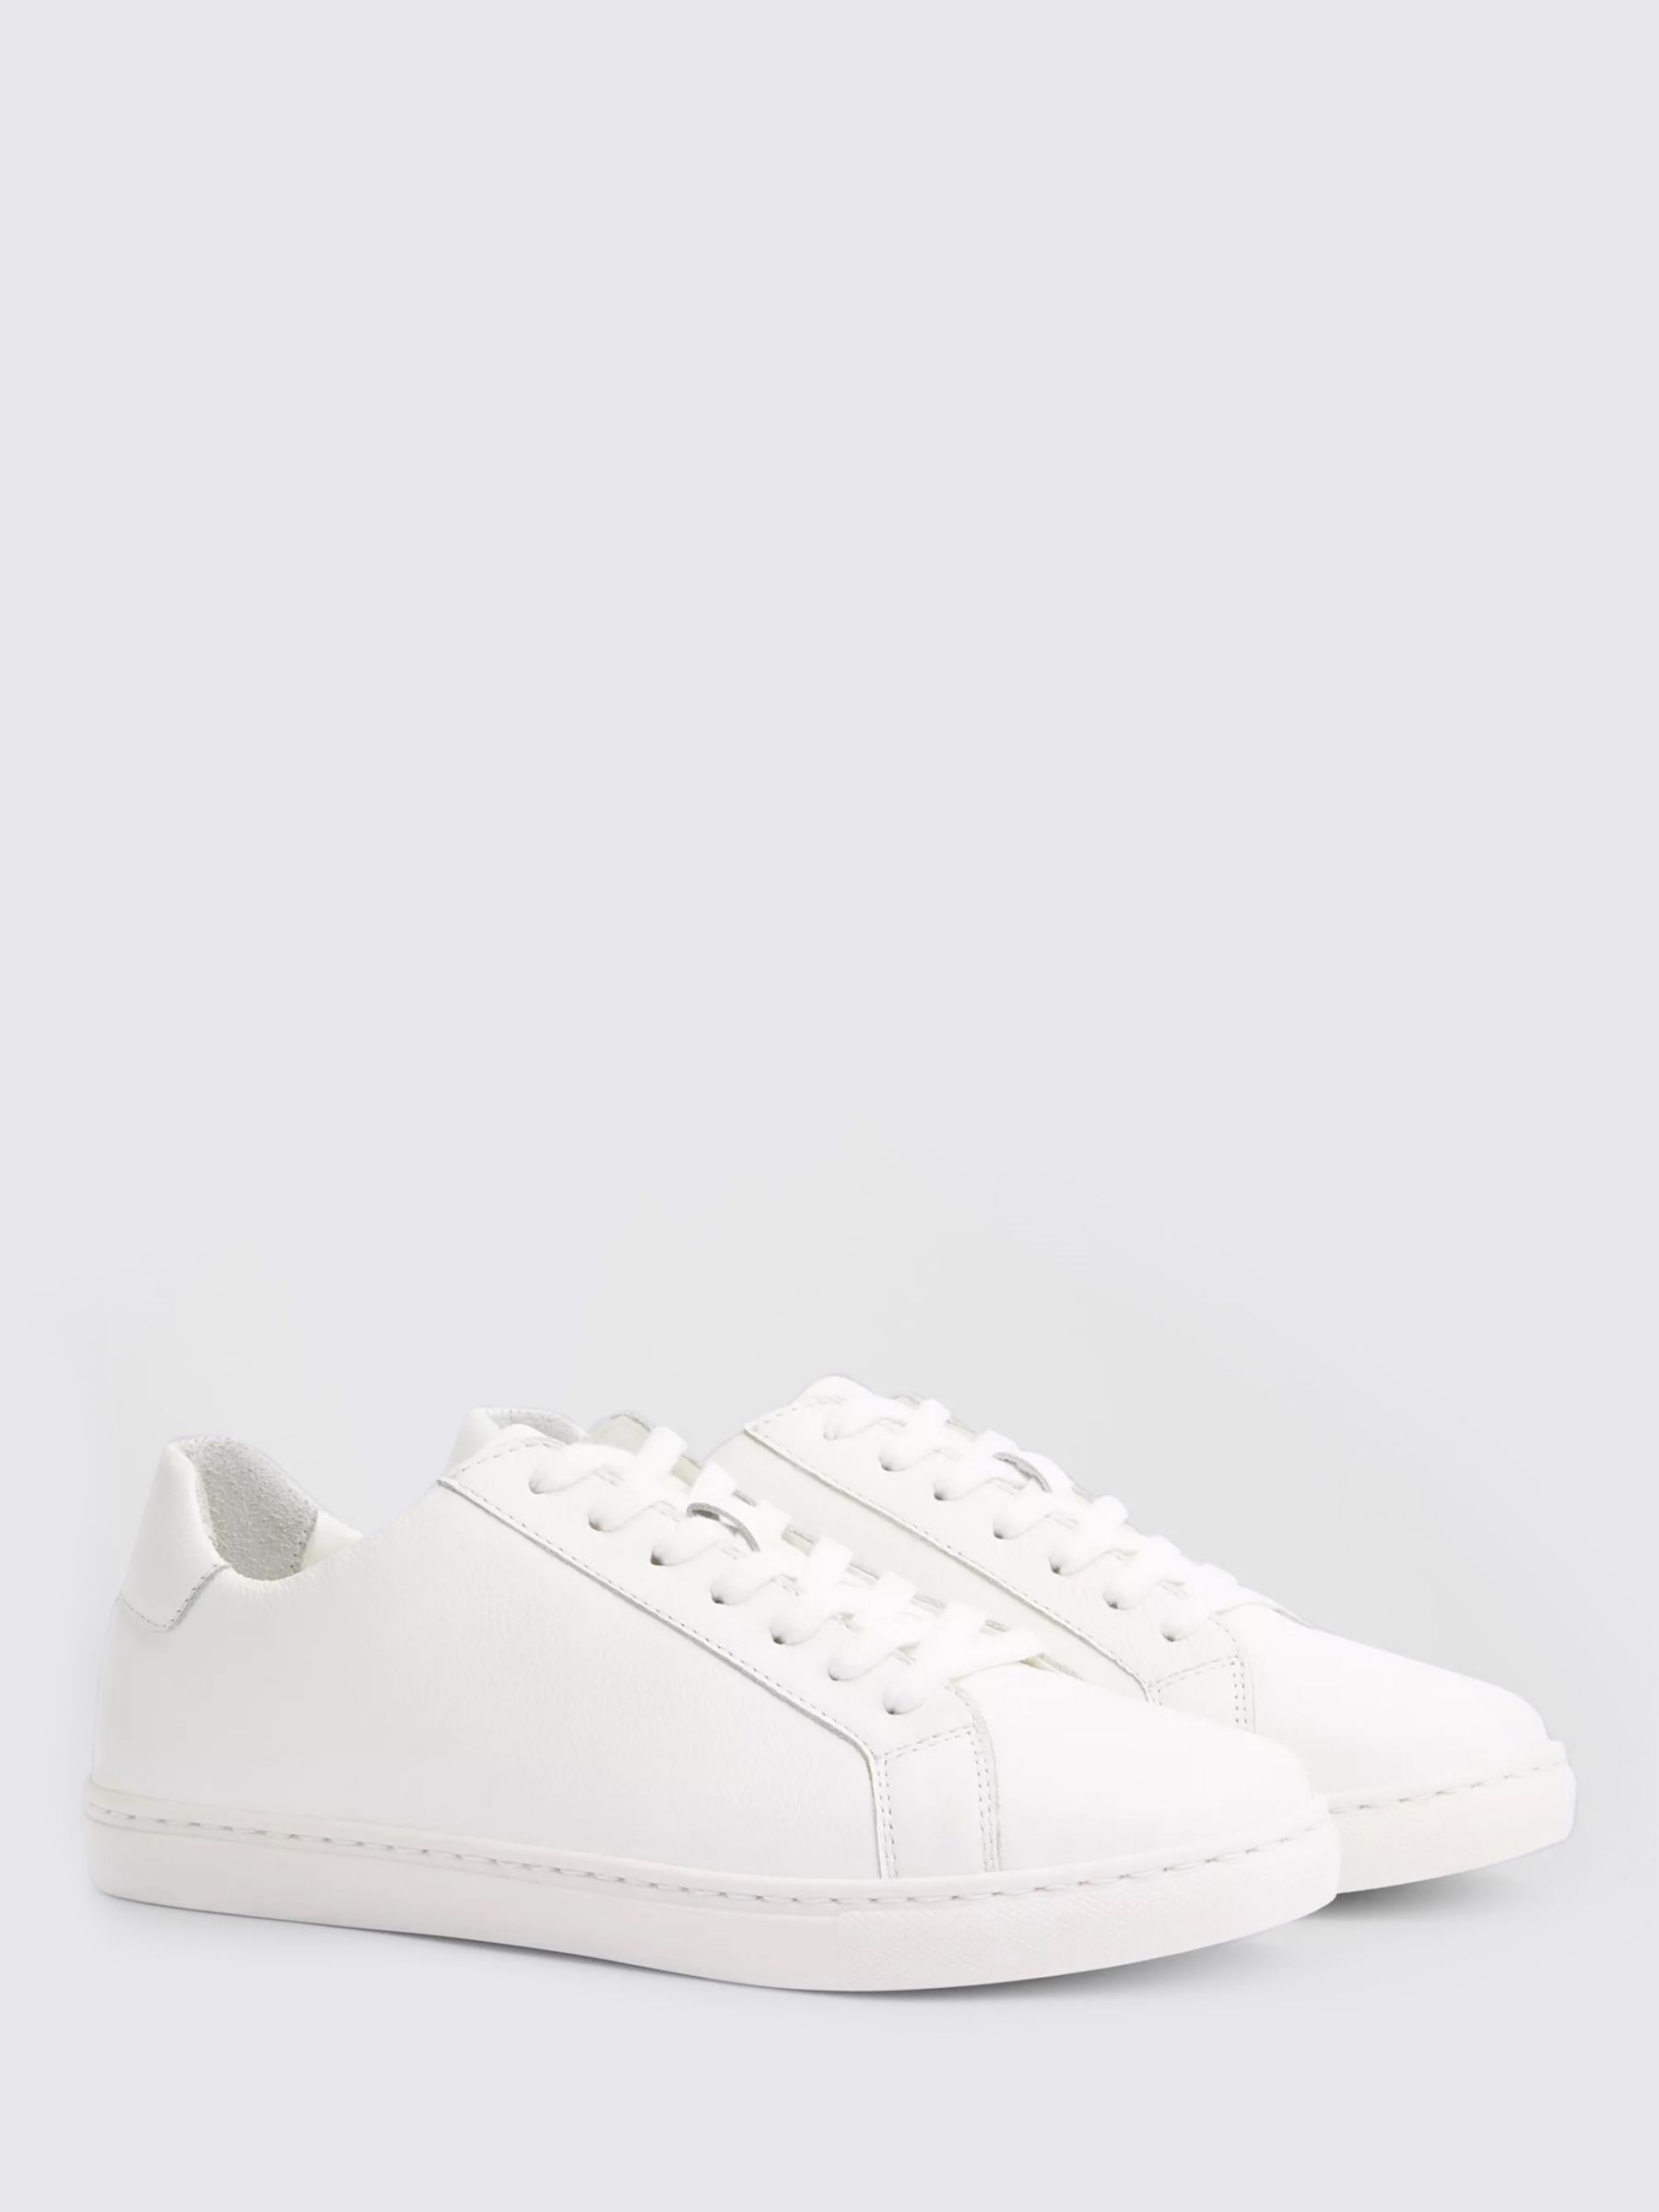 Moss Leather Trainers, White at John Lewis & Partners